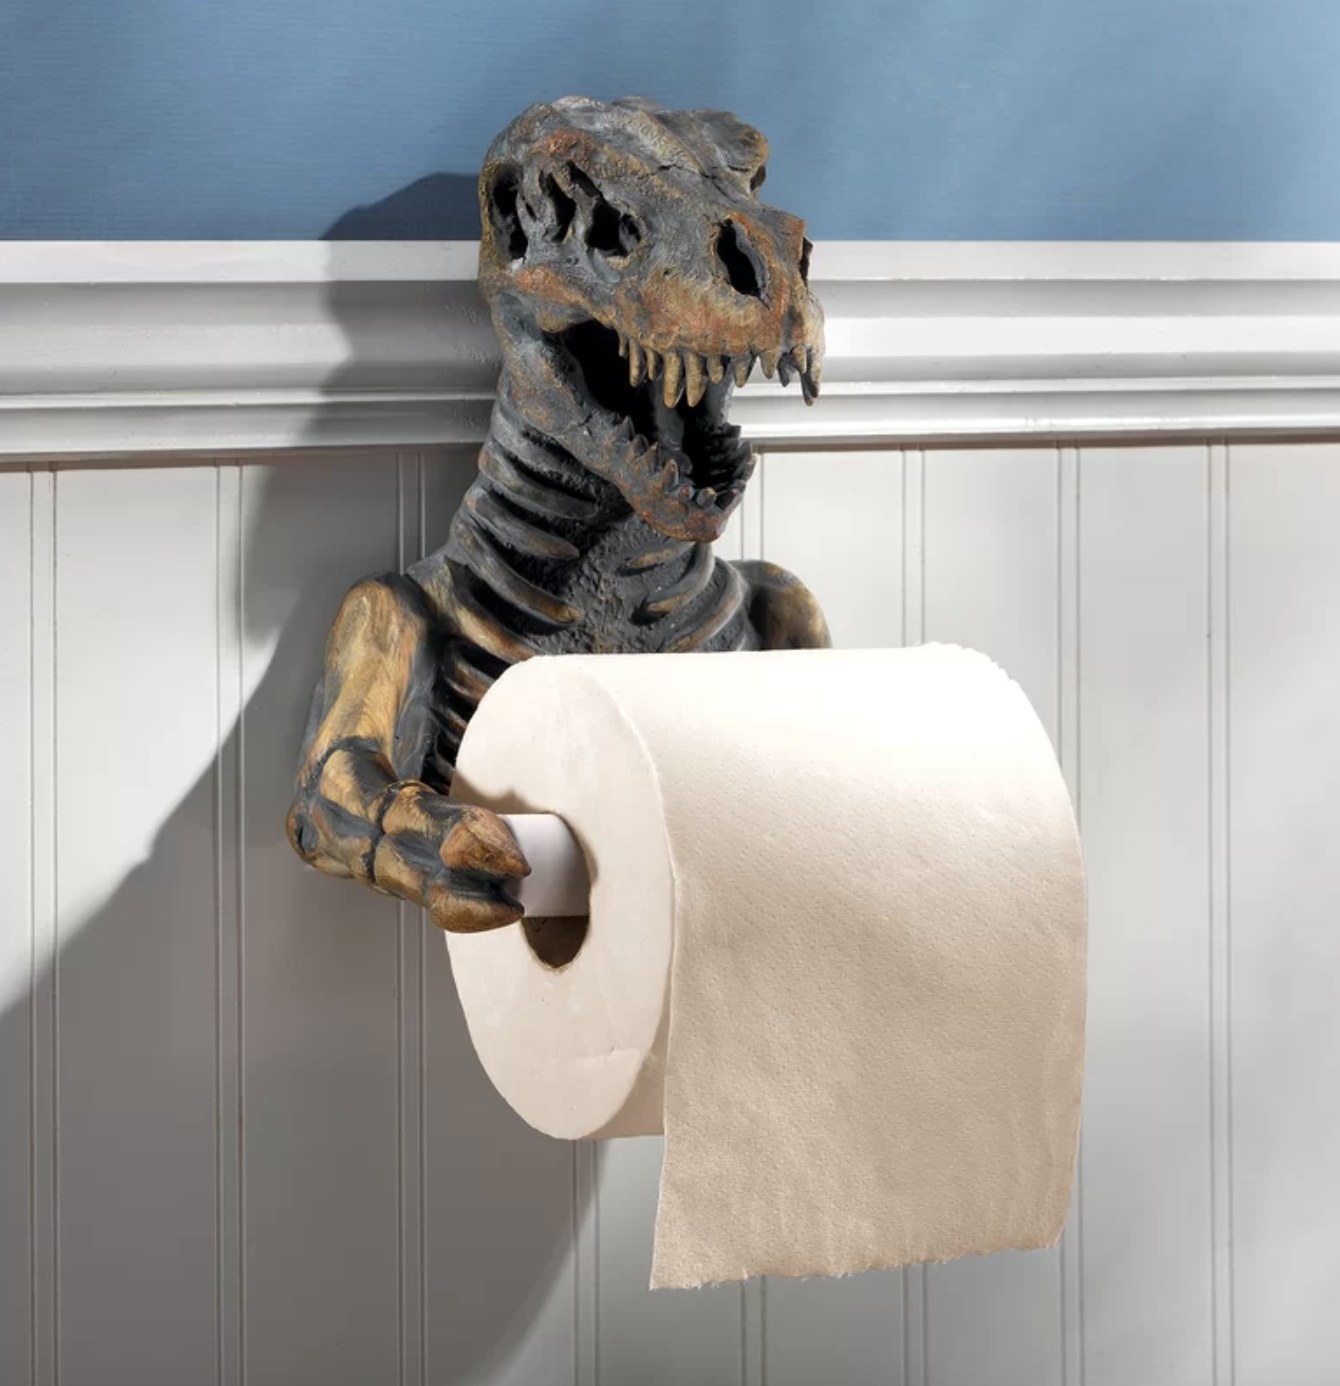 The toilet paper holder is the chest and arms of a dino and its large face and mouth